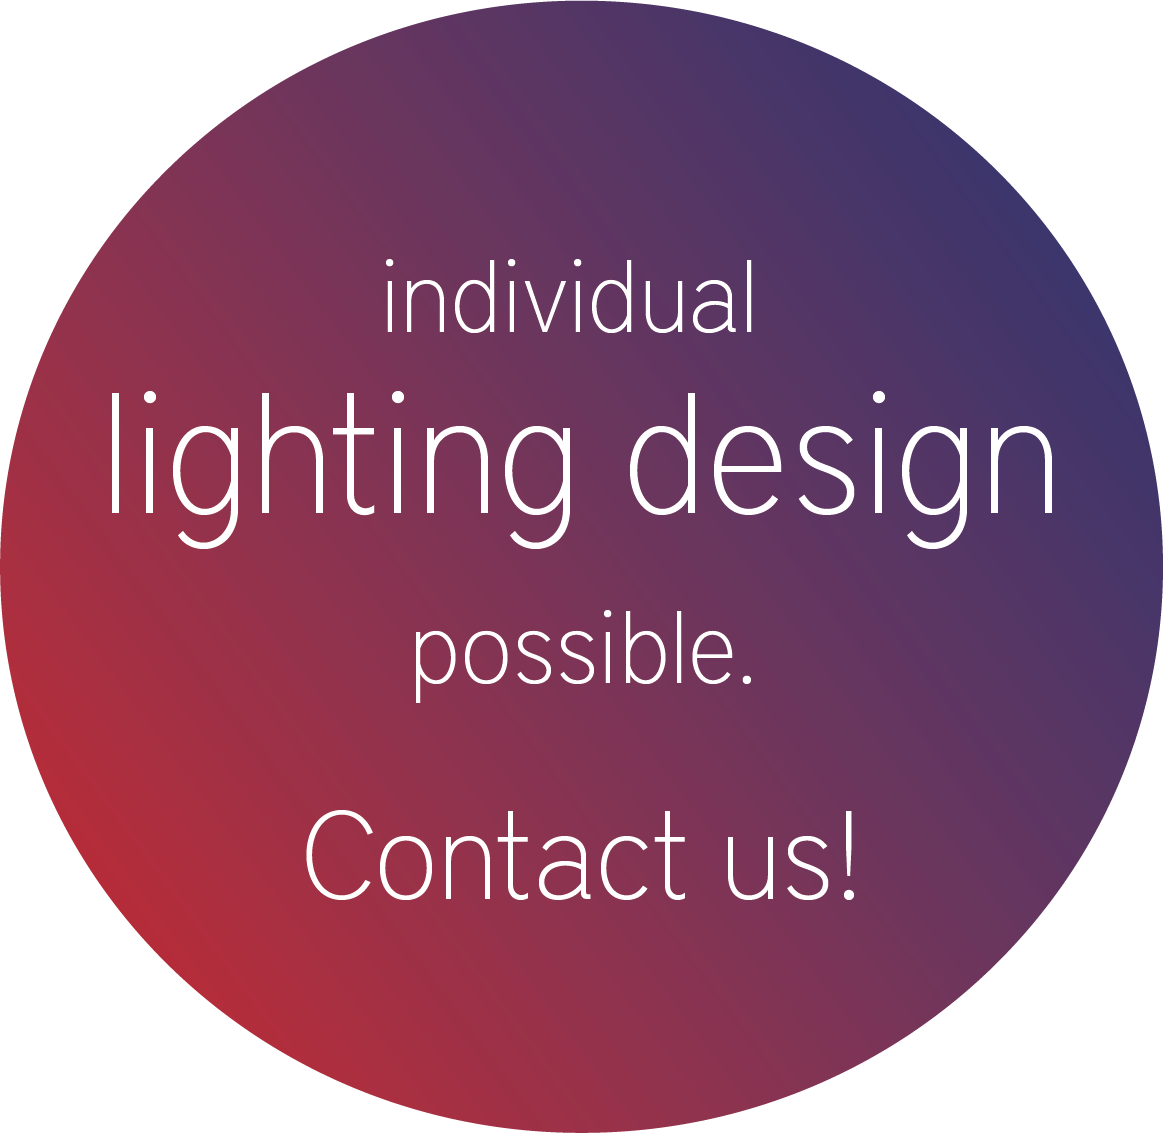 Individual lighting design possible. Contact us!